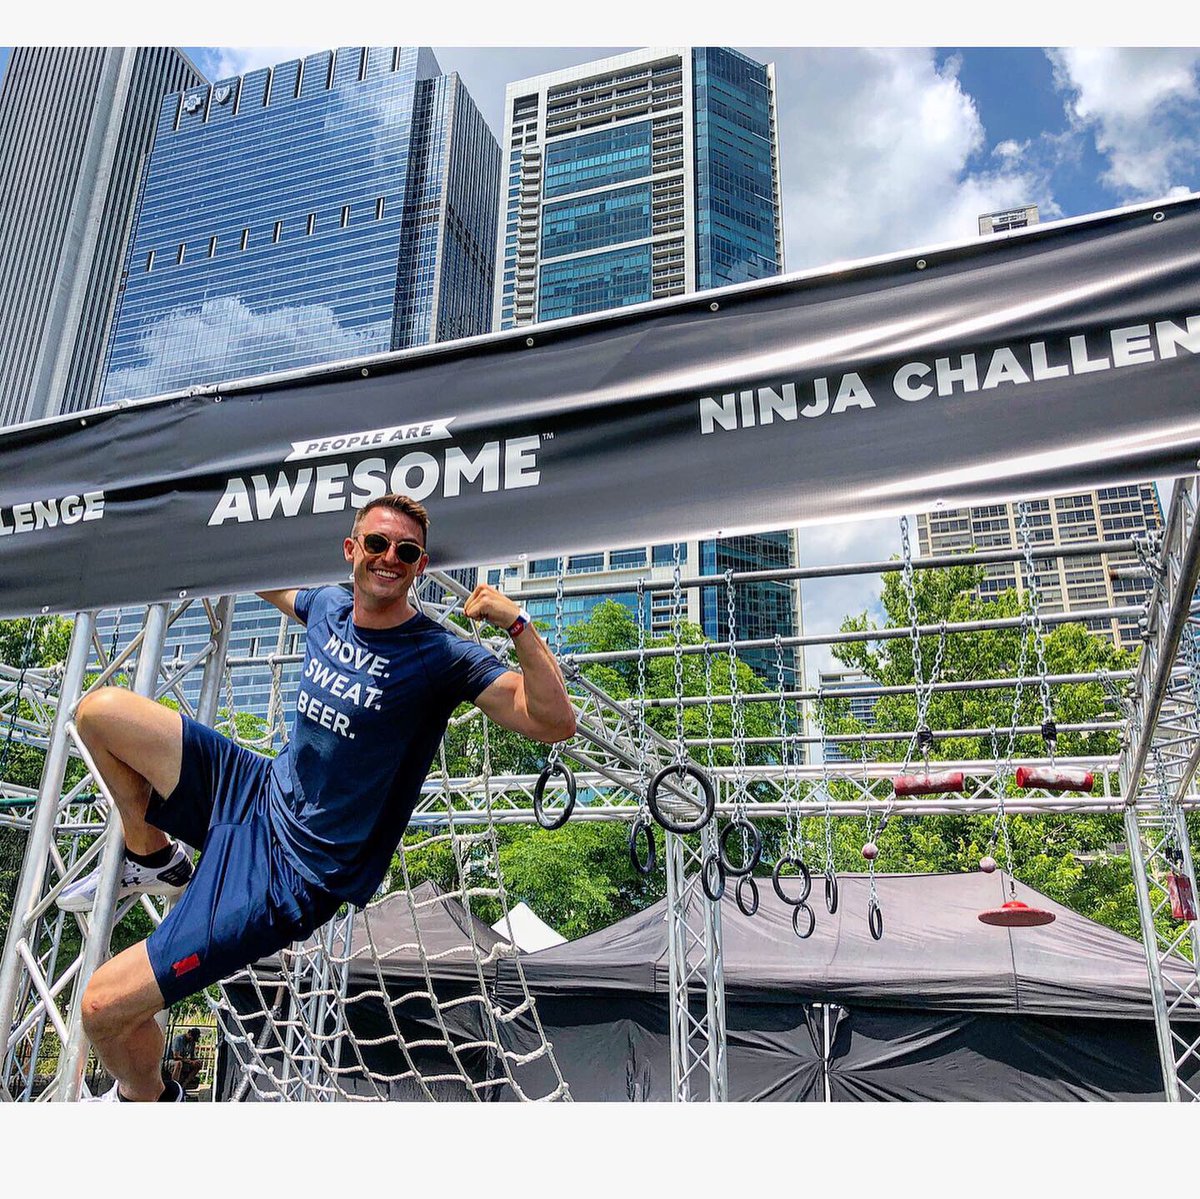 Awesome hosting @peopleareawesome Ninja Challenge💪🤓🏙 at the #MovementFestival by @michelobultra. Shout out to all the great Ninjas and Chicago...ians for taking on the course!